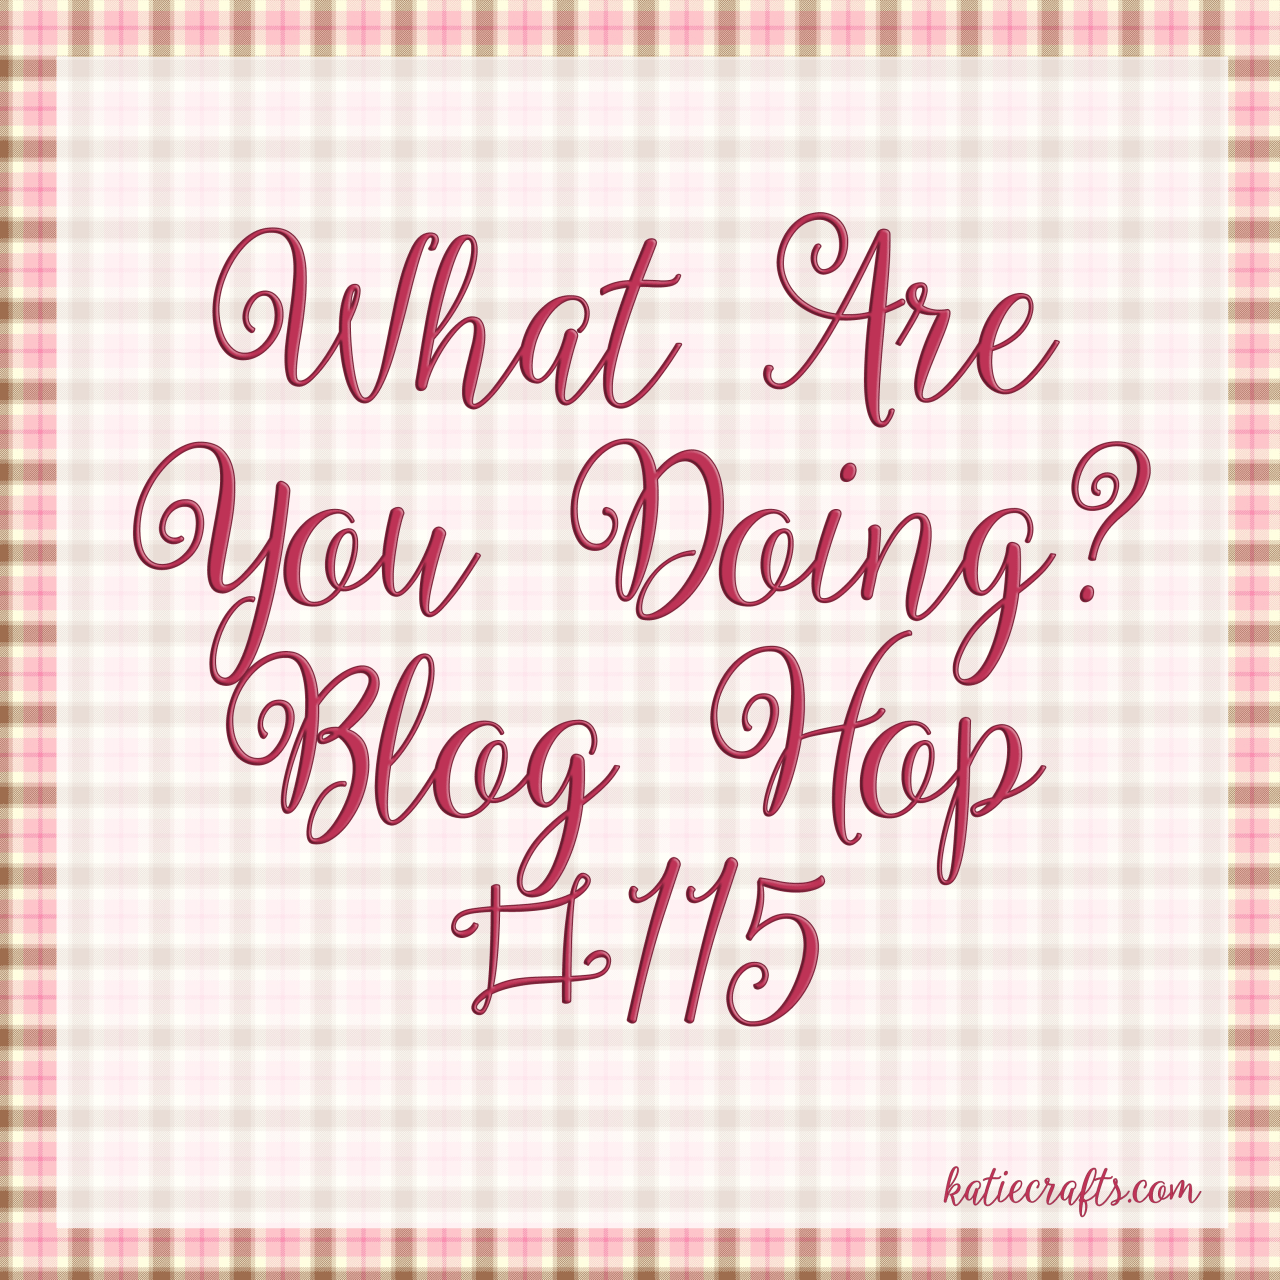 What Are You Doing? Blog Hop #115 on Katie Crafts; https://www.katiecrafts.com